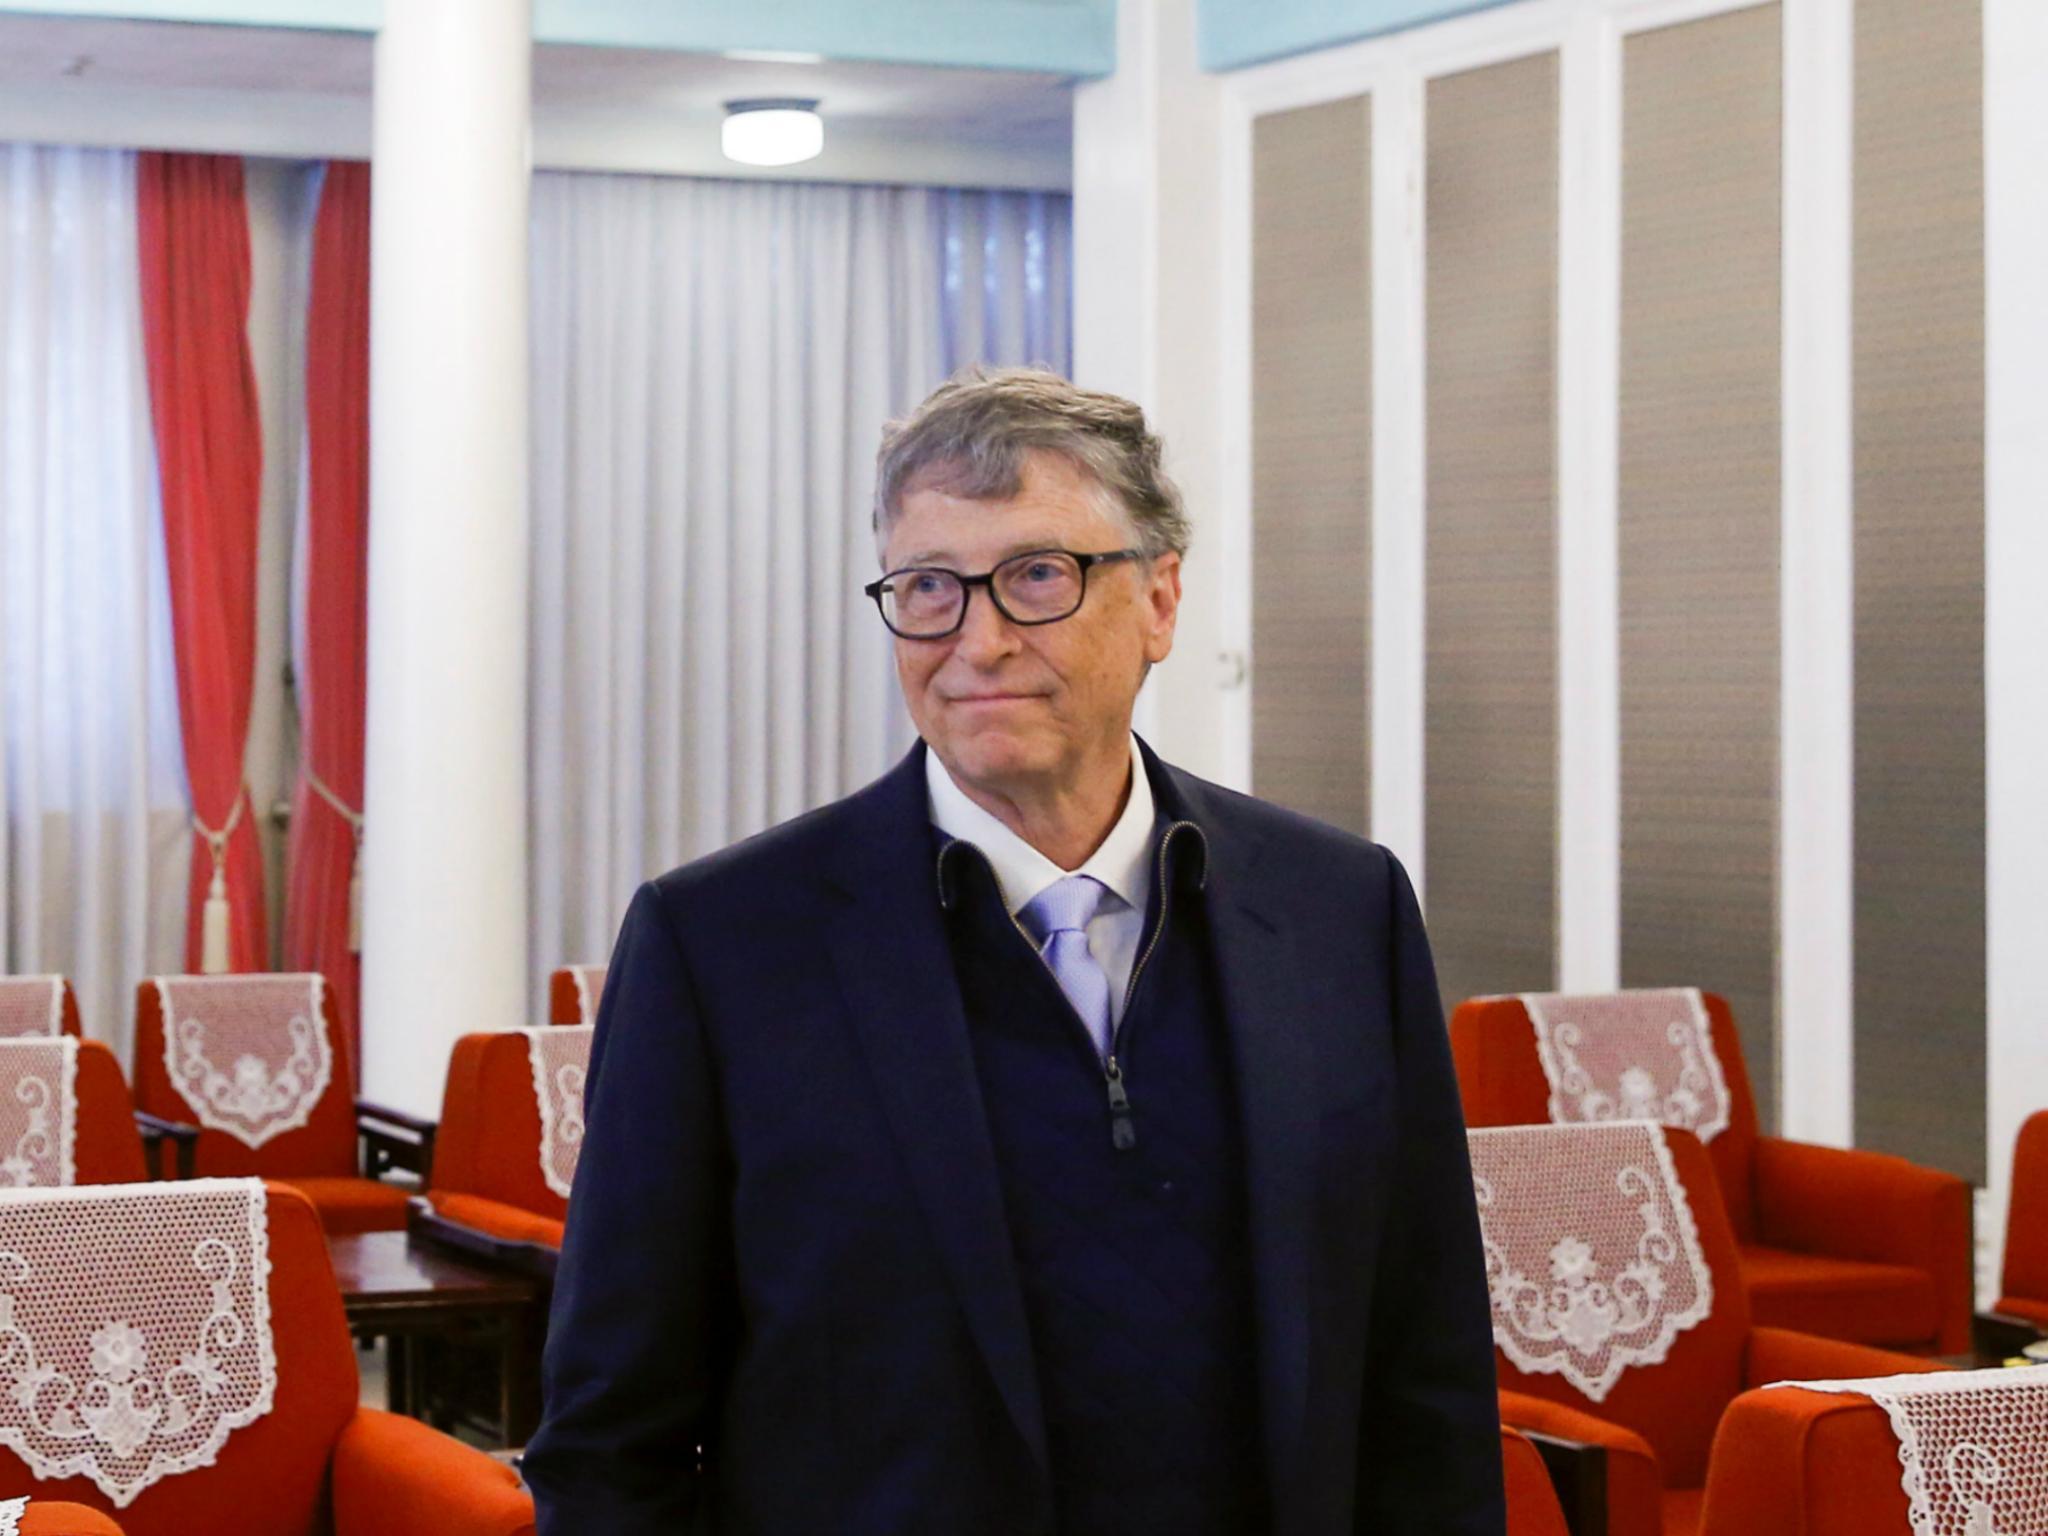 Microsoft co-founder and philanthropist Bill Gates attends a meeting with Chinese Premier Li Keqiang (not pictured) at the Zhongnanhai government compound in Beijing, China, November 3, 2017